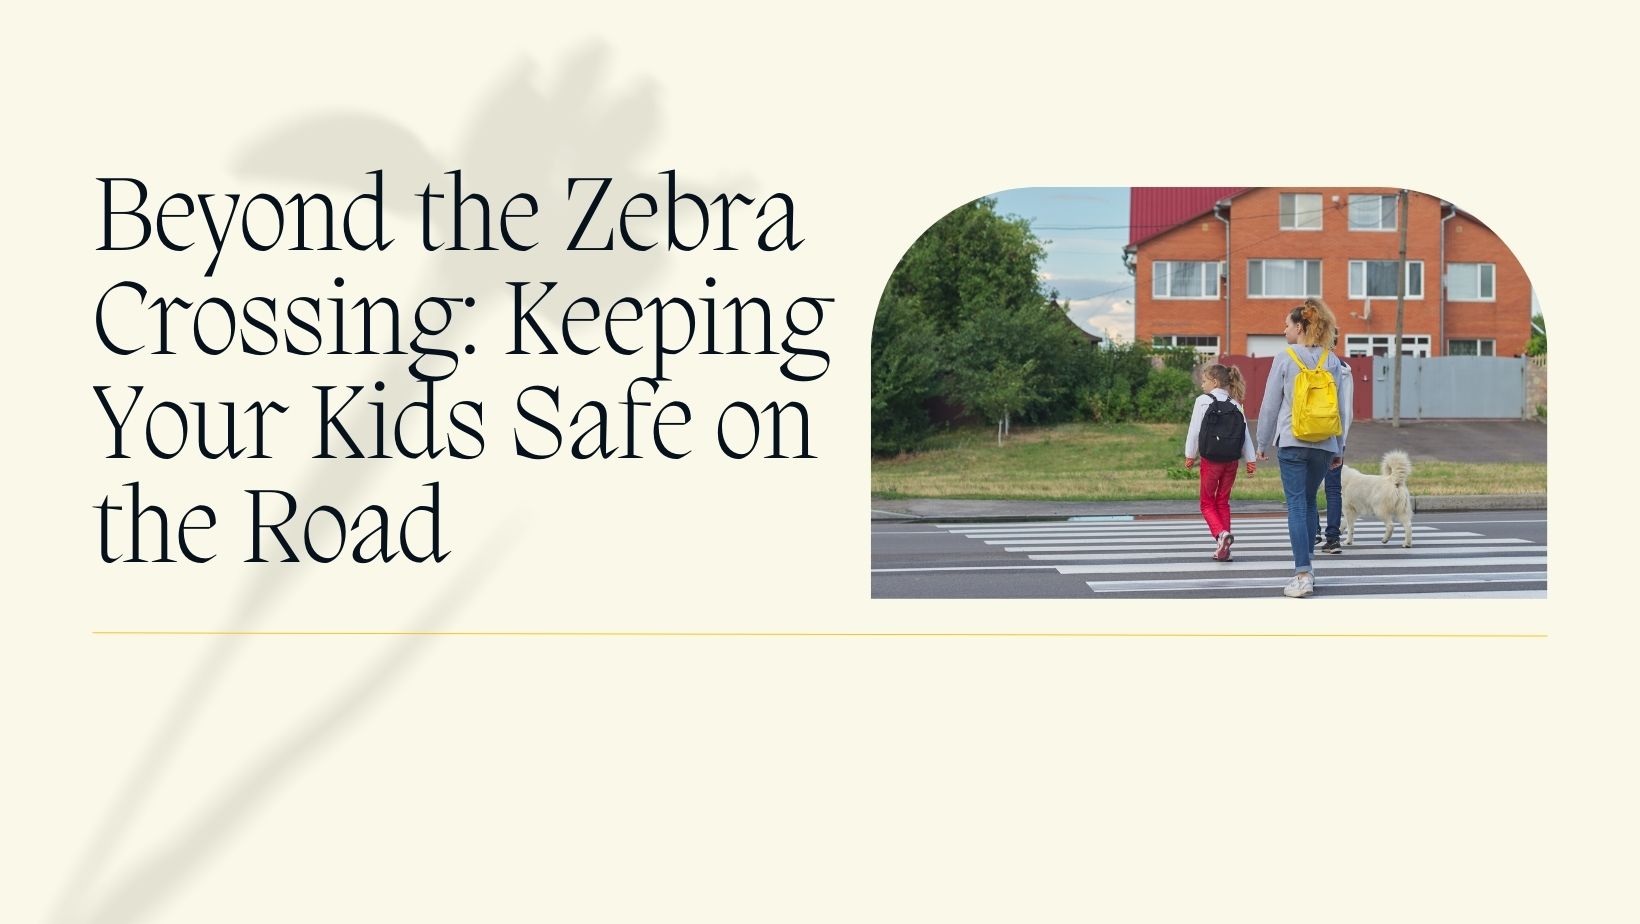 Beyond the Zebra Crossing: Keeping Your Kids Safe on the Road